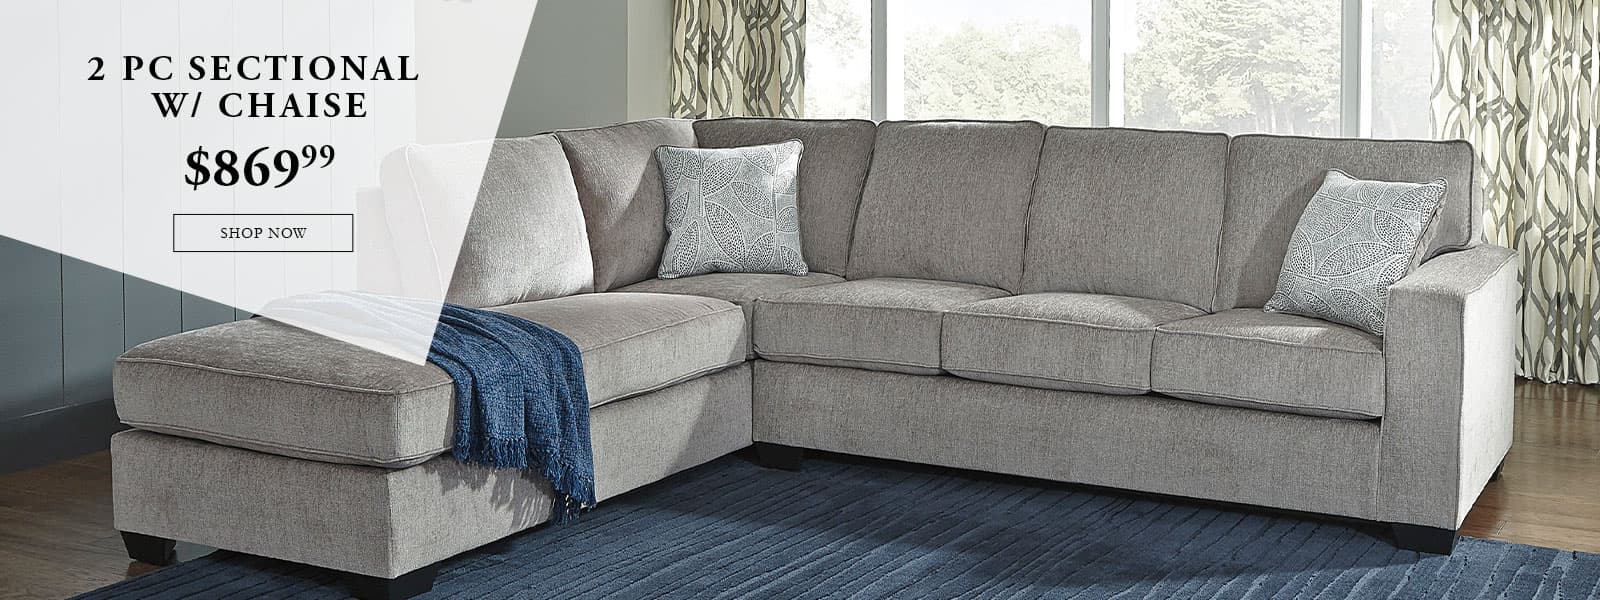 2 pc sectional w/ chaise $869.99